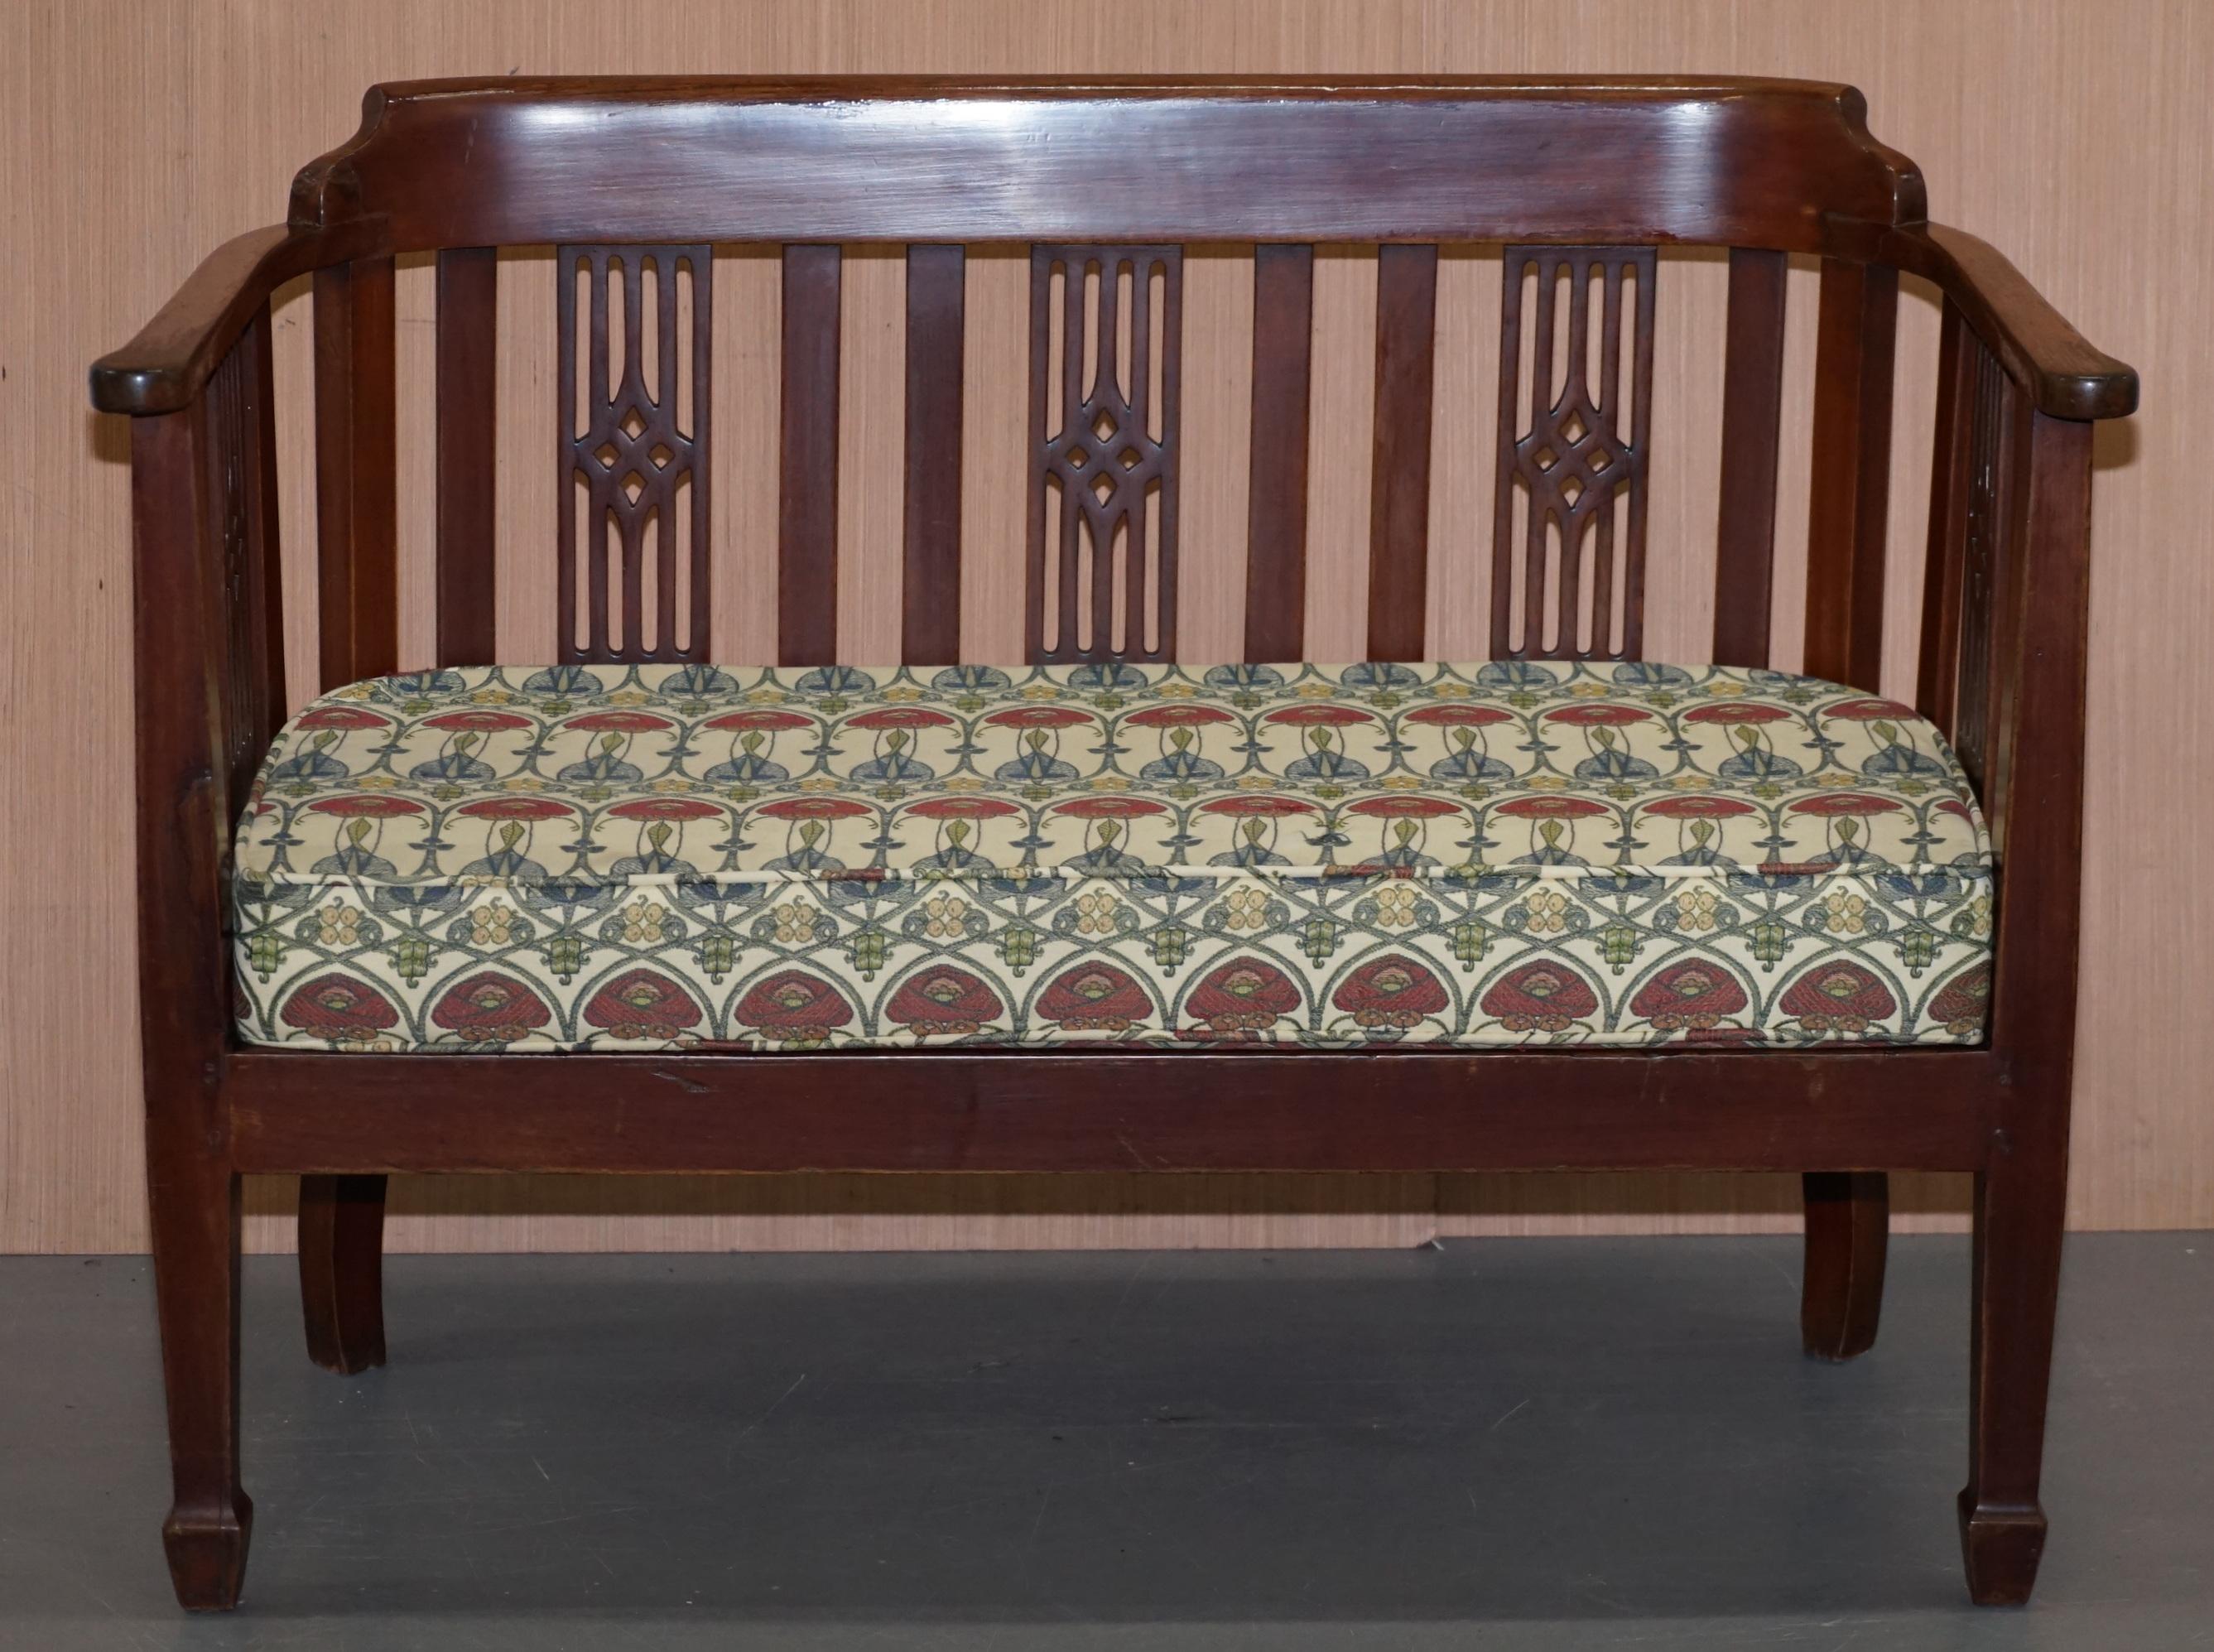 We are delighted to offer for sale this lovely vintage stained oak two person bench with rattan berger base and world famous Charles Rennie Mackintosh Art Nouveau upholstered seat cushion

A very good looking and well made bench seat, very